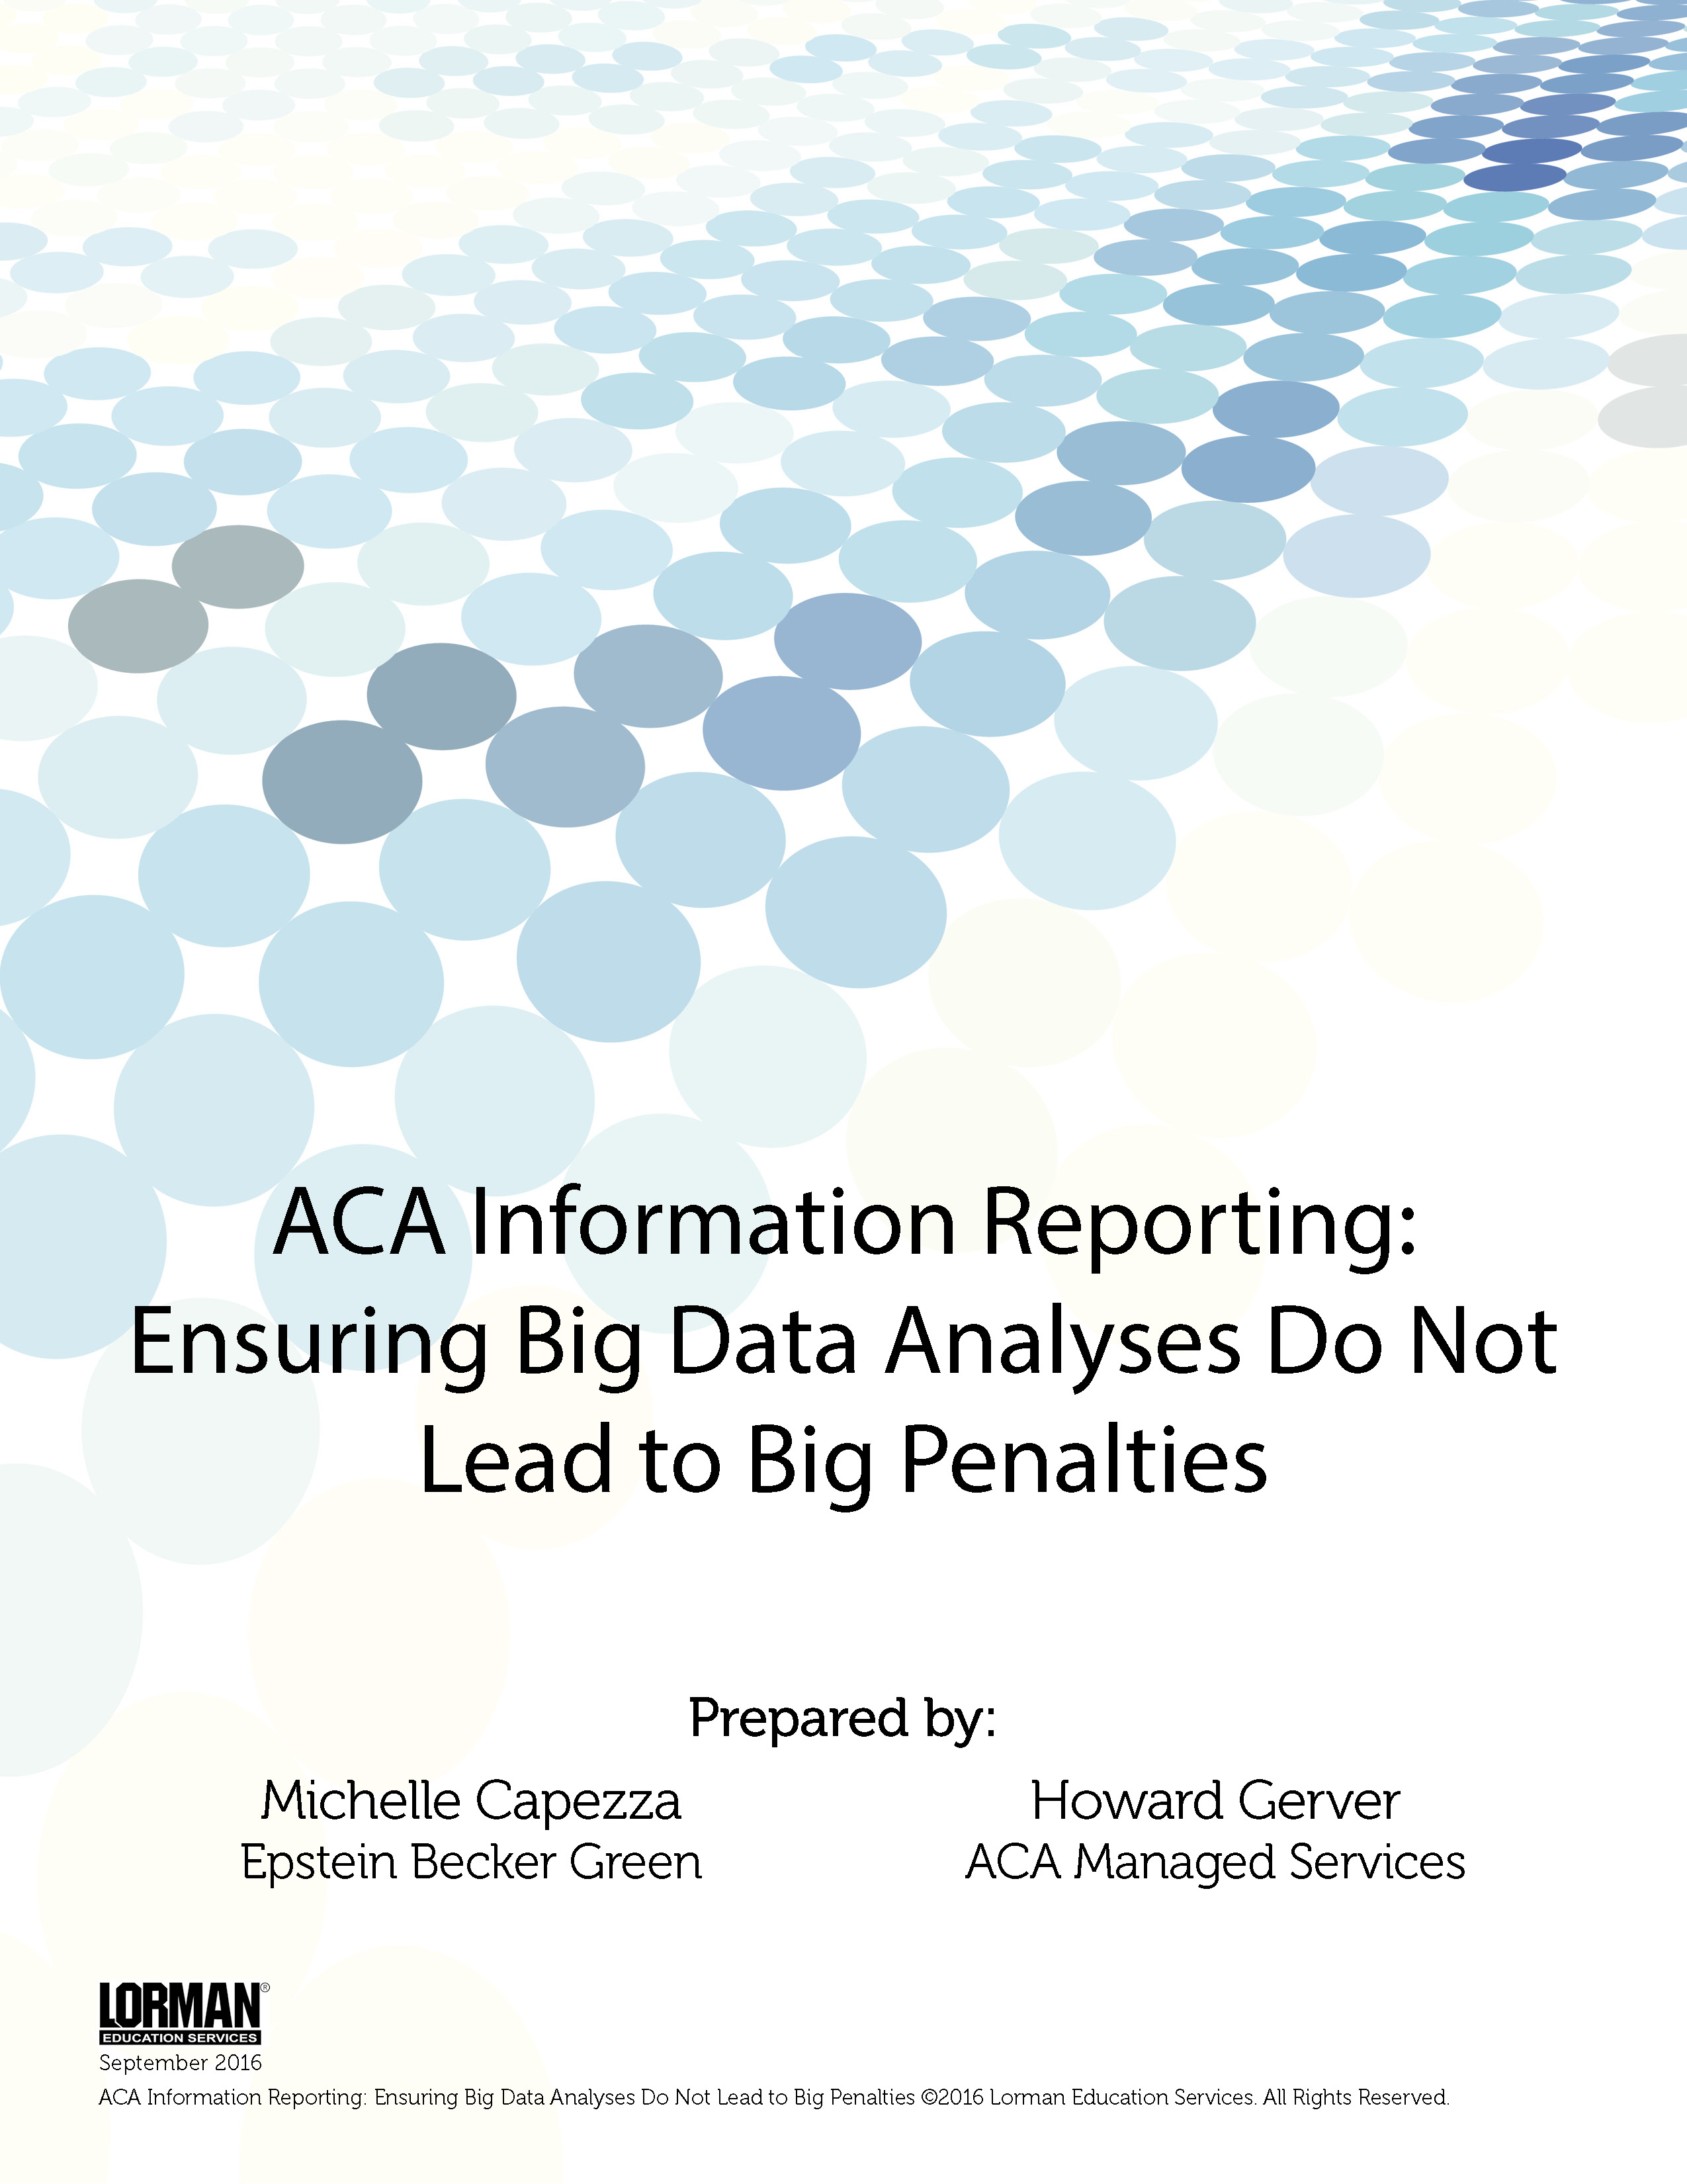 ACA Information Reporting - Ensuring Big Data Analyses Do Not Lead to Big Penalties